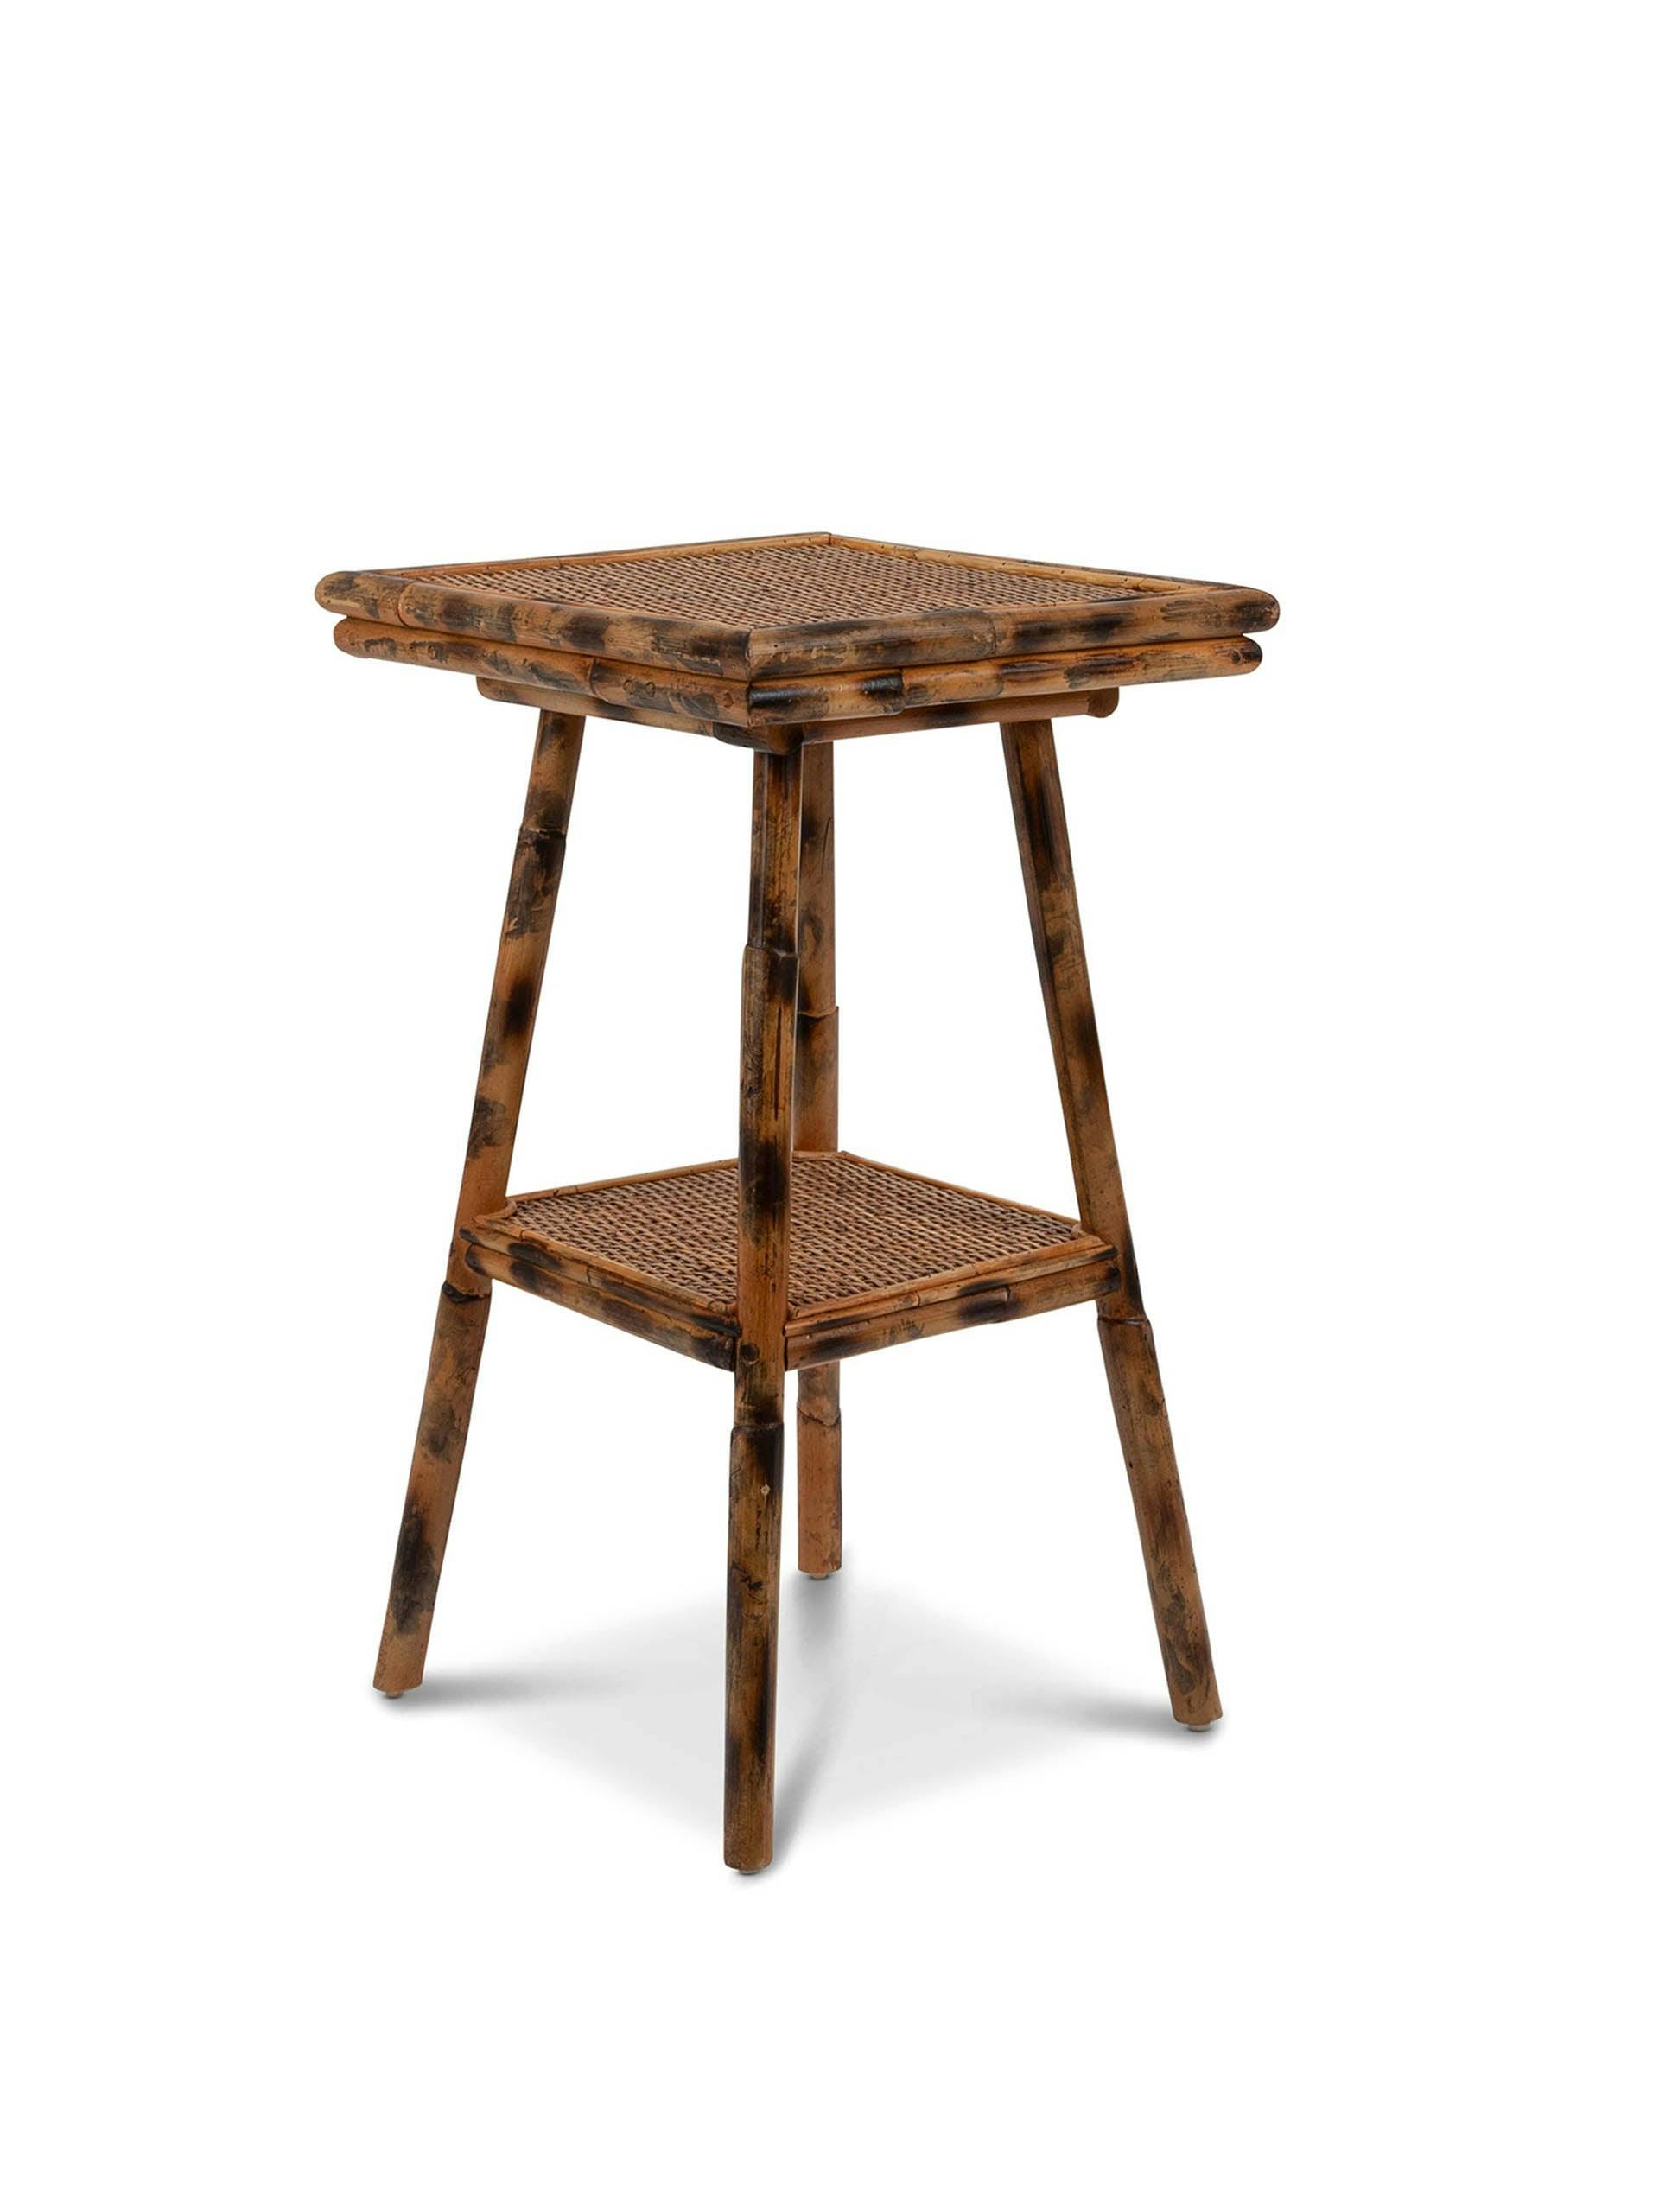 Pimlico bamboo side table